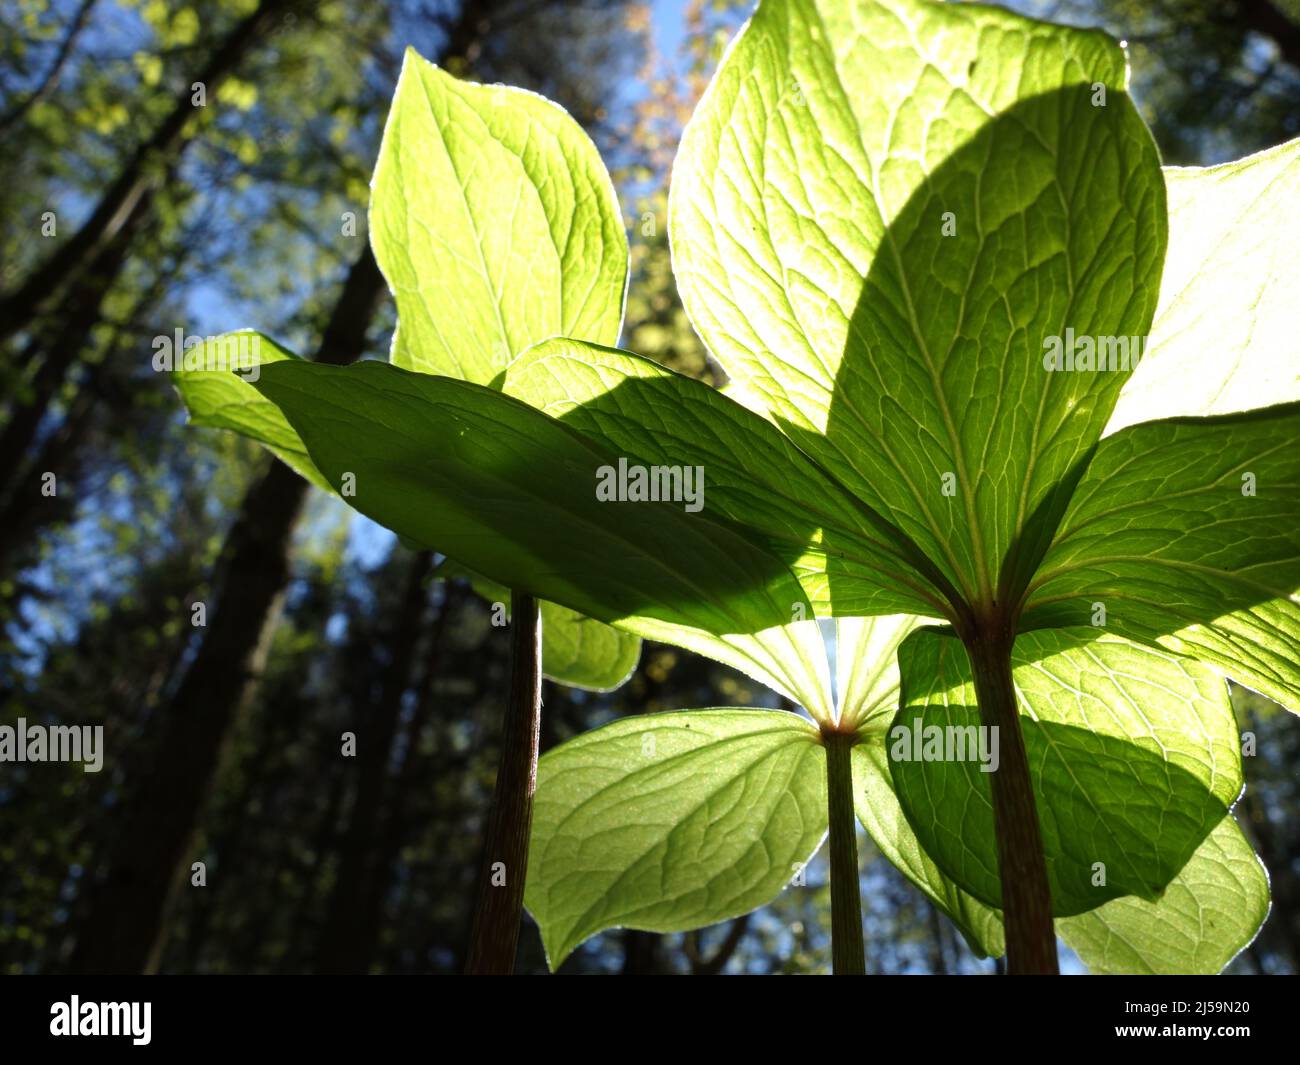 Herb Paris from the underside, here you can clearly see the thick stem of the plant and very clearly the composition of the leaf against the sunlight. Stock Photo